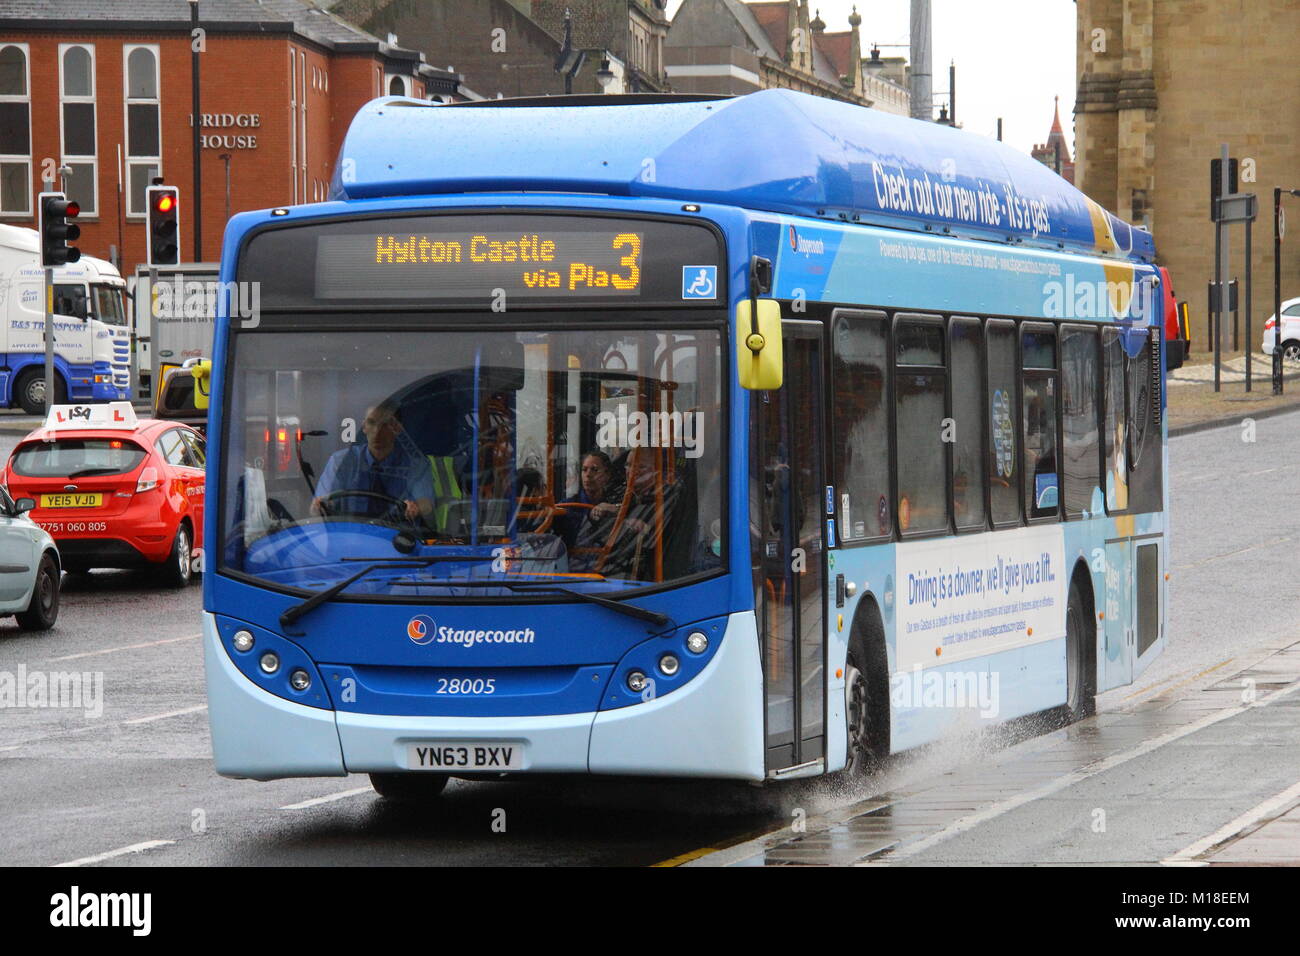 A SCANIA BUS WITH ADL ALEXANDER DENNIS ENVIRO 300 BODY POWERED BY GAS WORKING FOR STAGECOACH IN SUNDERLAND TRAVELLING IN THE RAIN ON A BUSY ROAD Stock Photo